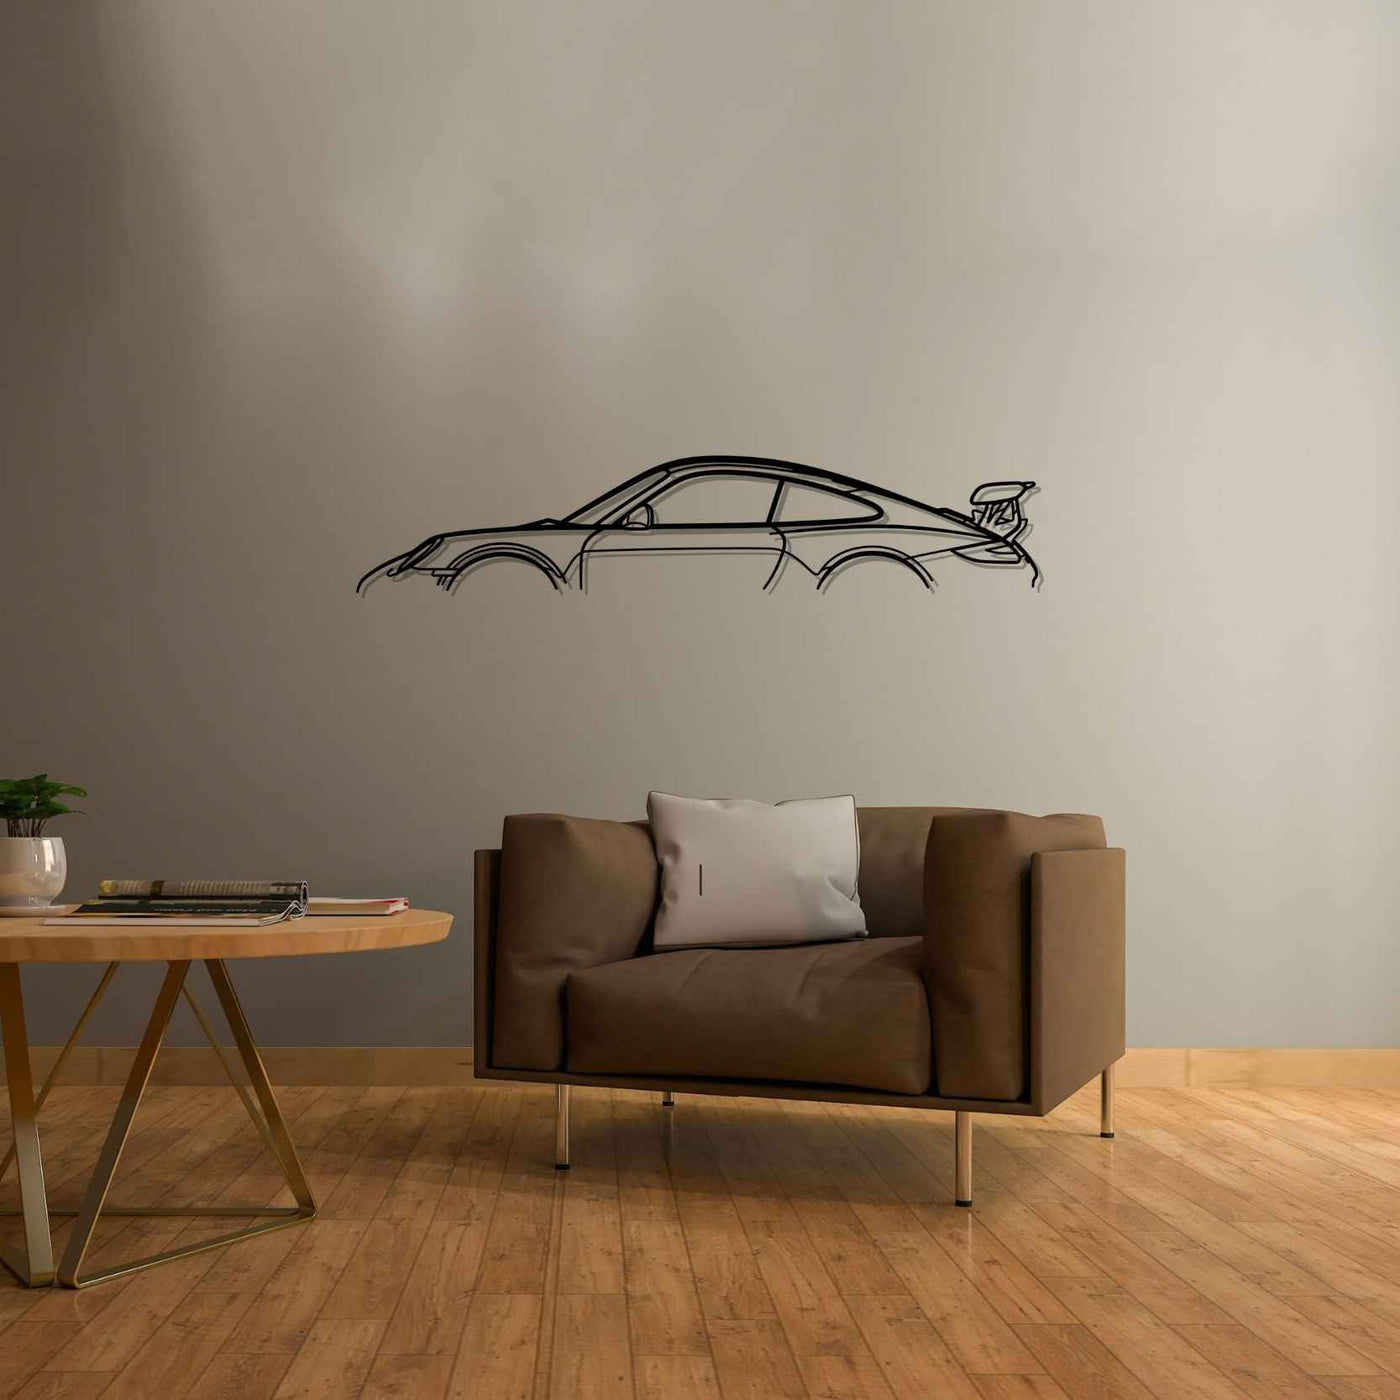 911 997 GT3 RS Classic Metal Silhouette Wall Art